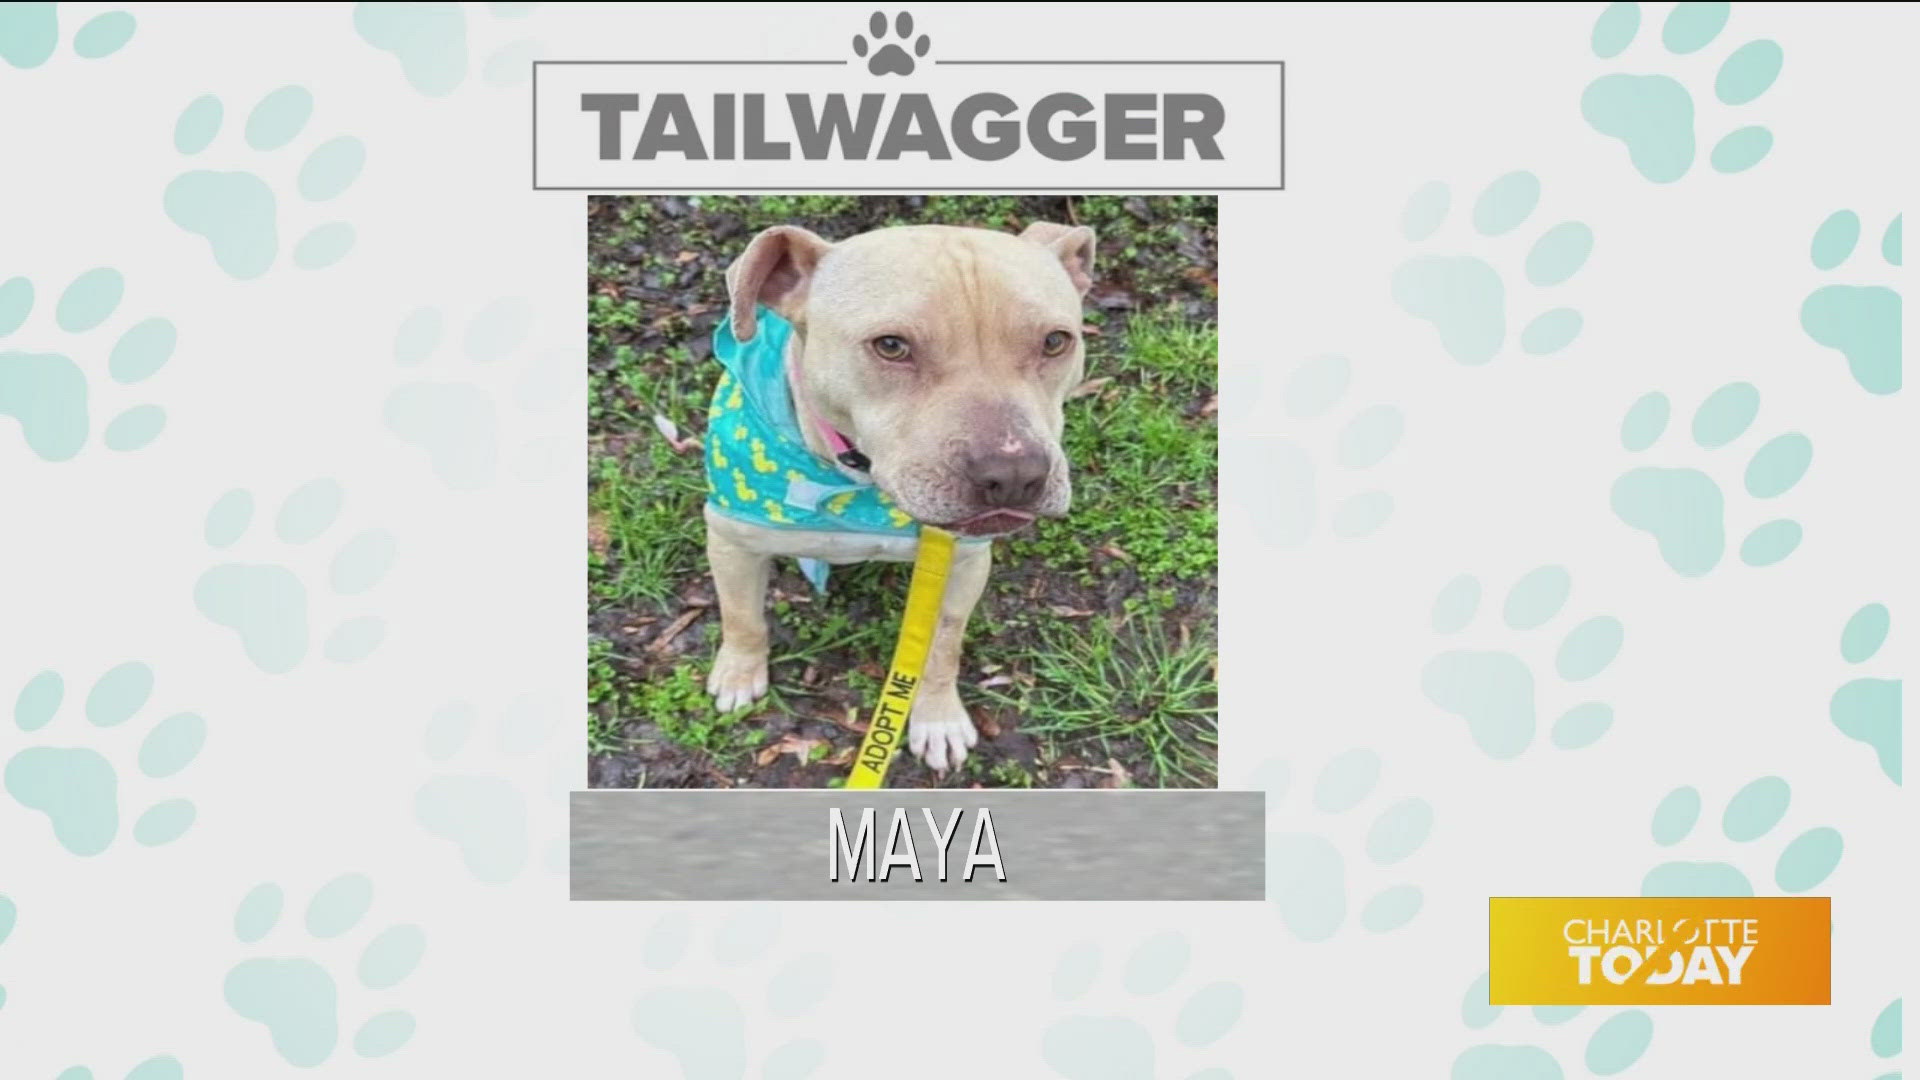 Maya is available for adoption today from Animal Care and Control